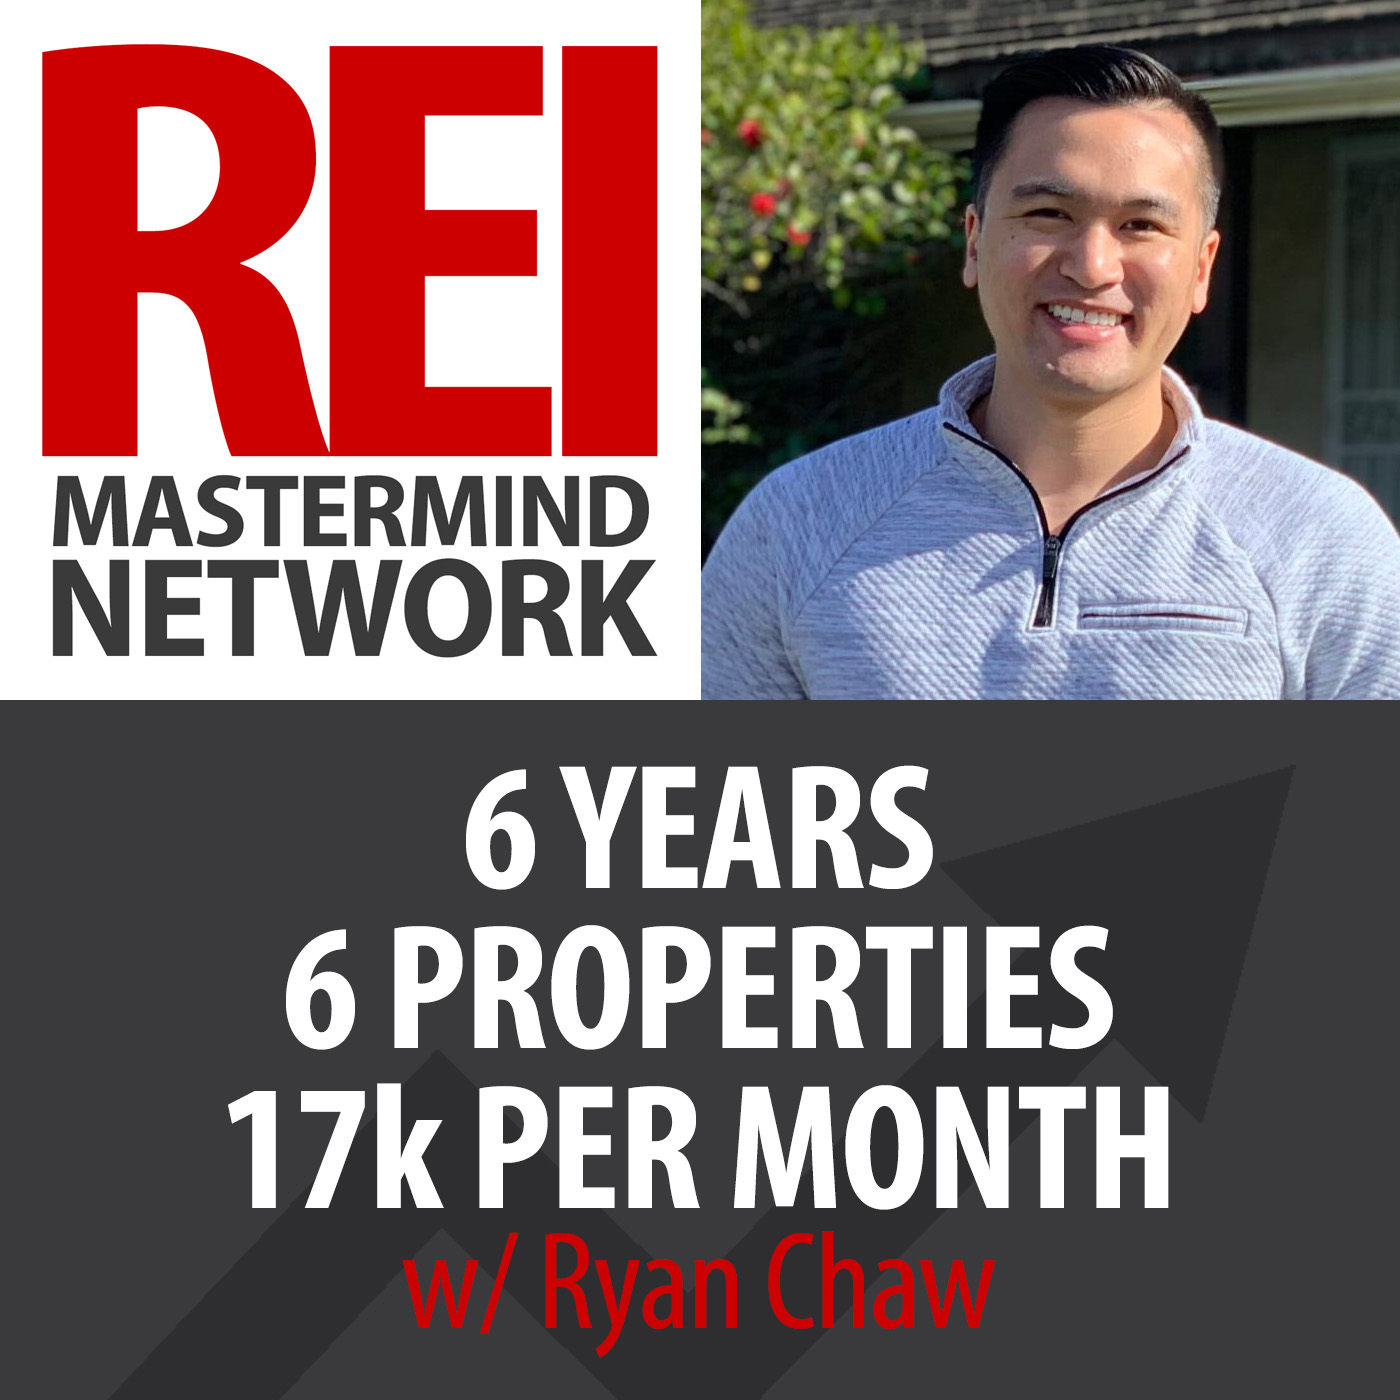 6 years 6 properties $17k with Ryan Chaw Image